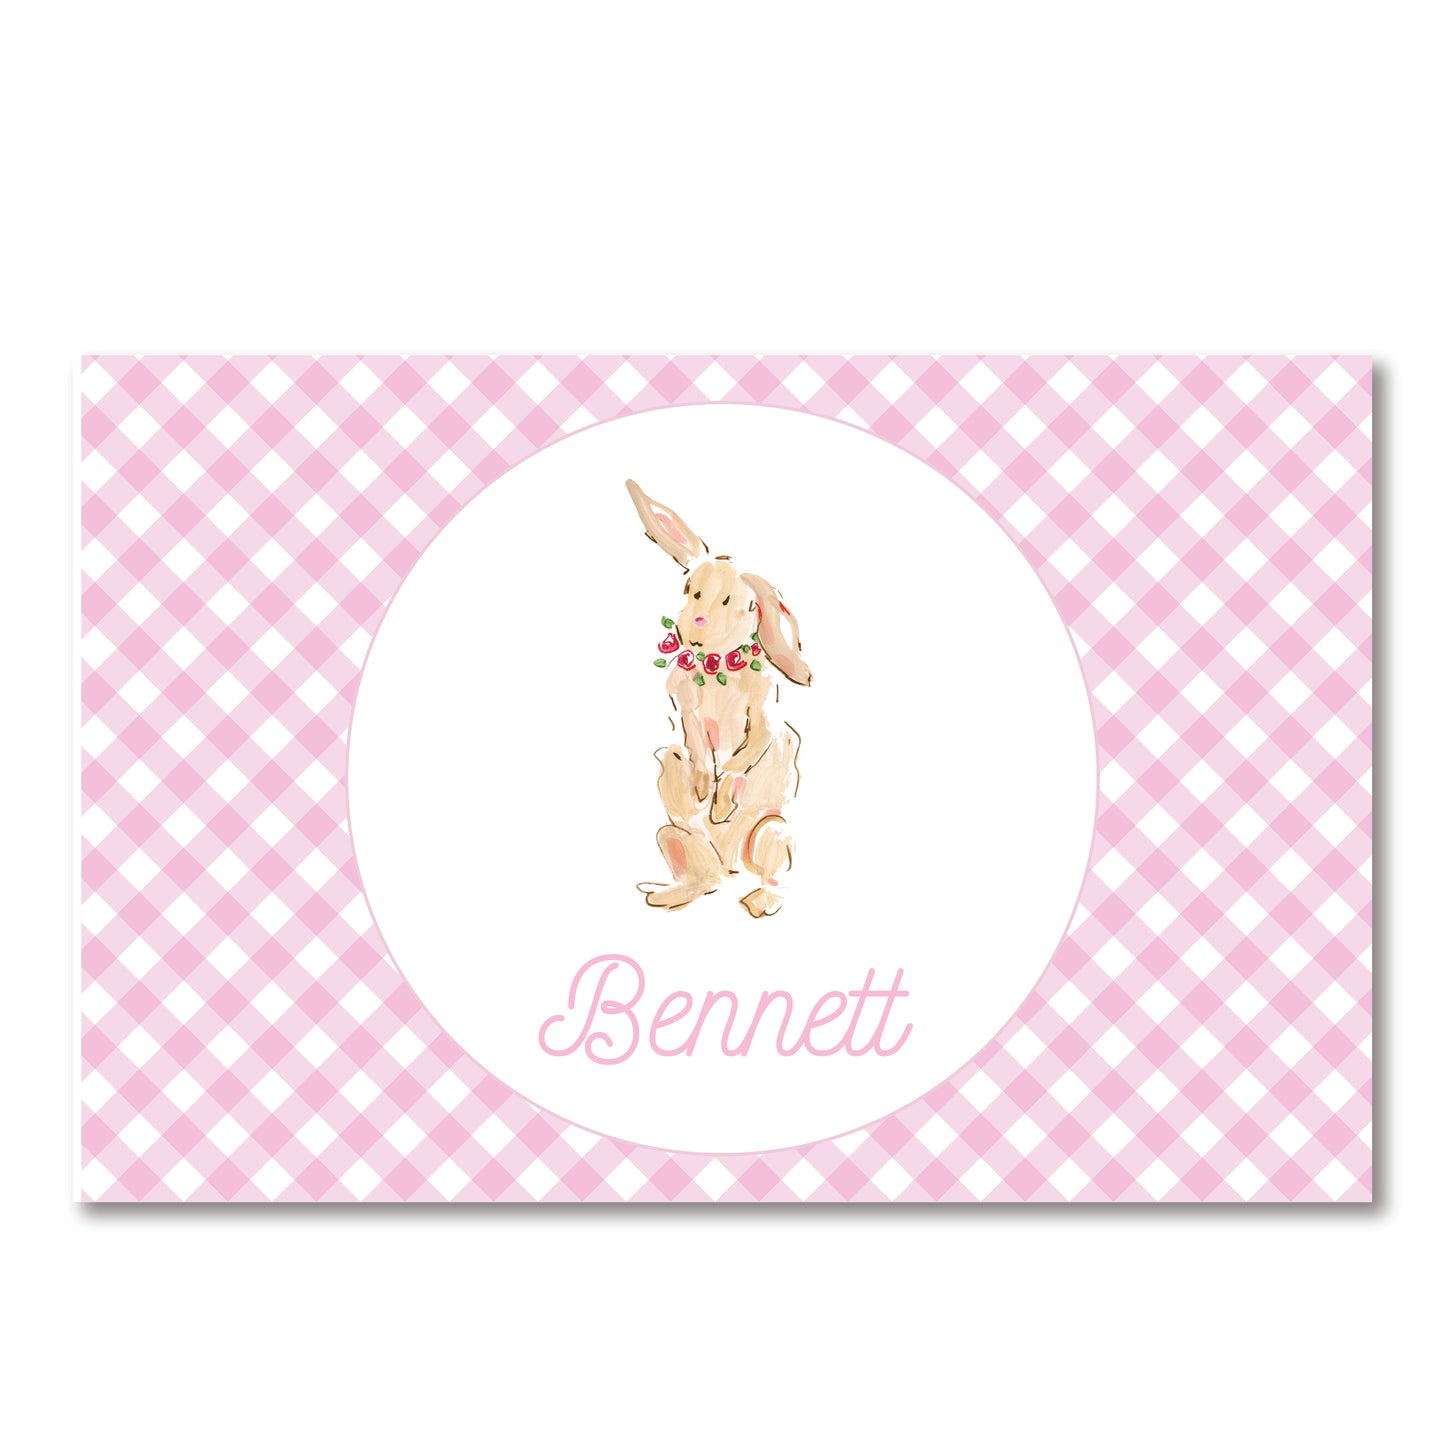 Copy of Easter/ Sailboat Placemat Pink